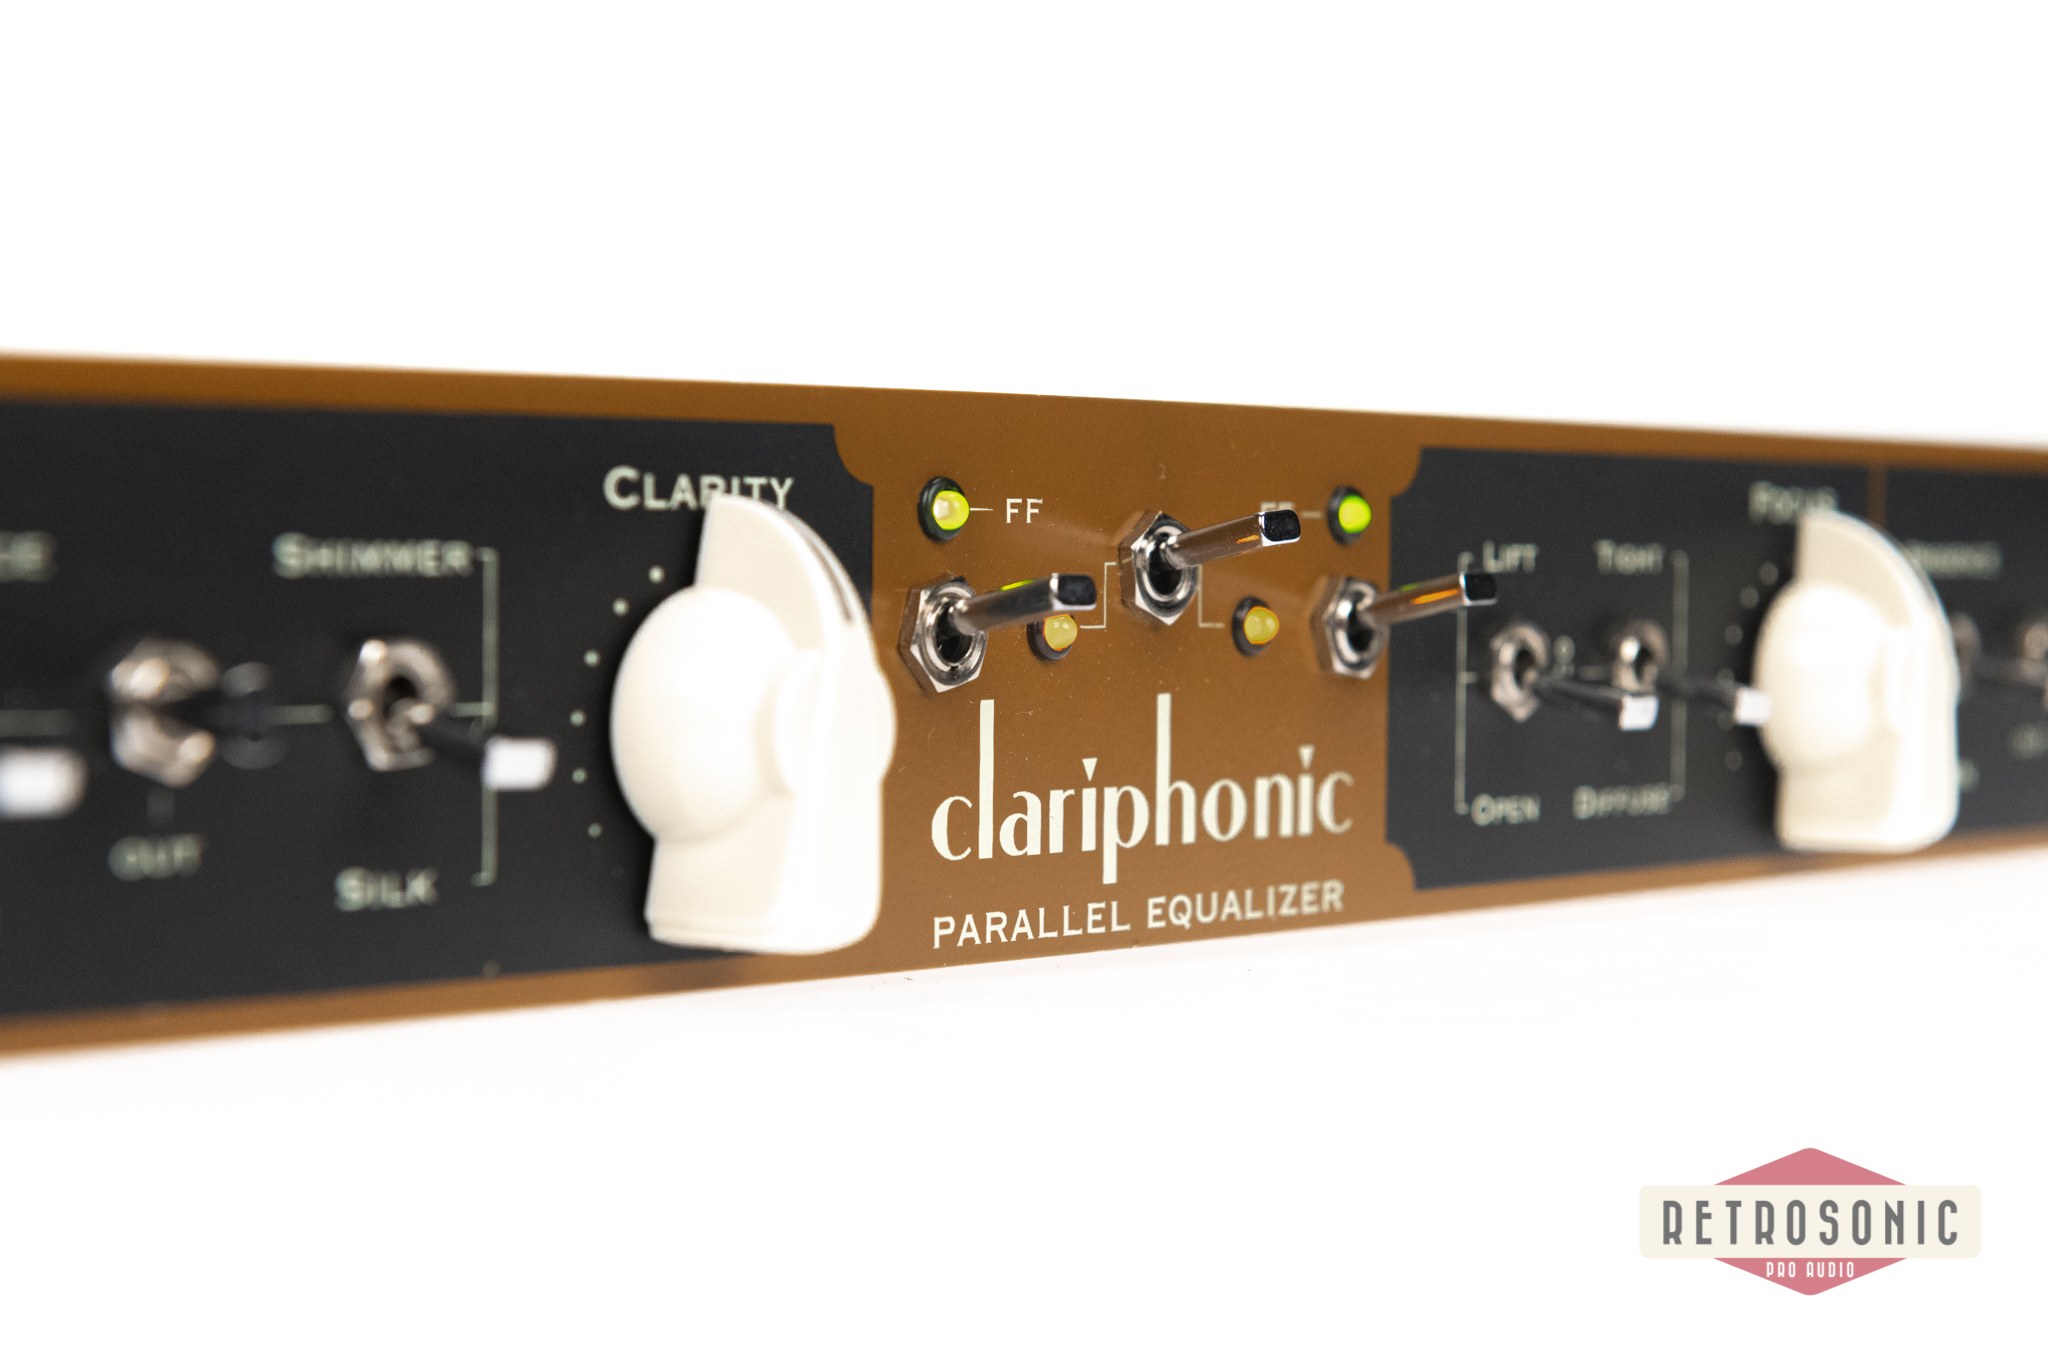 Kush Clariphonic Stereo Parallel Equalizer